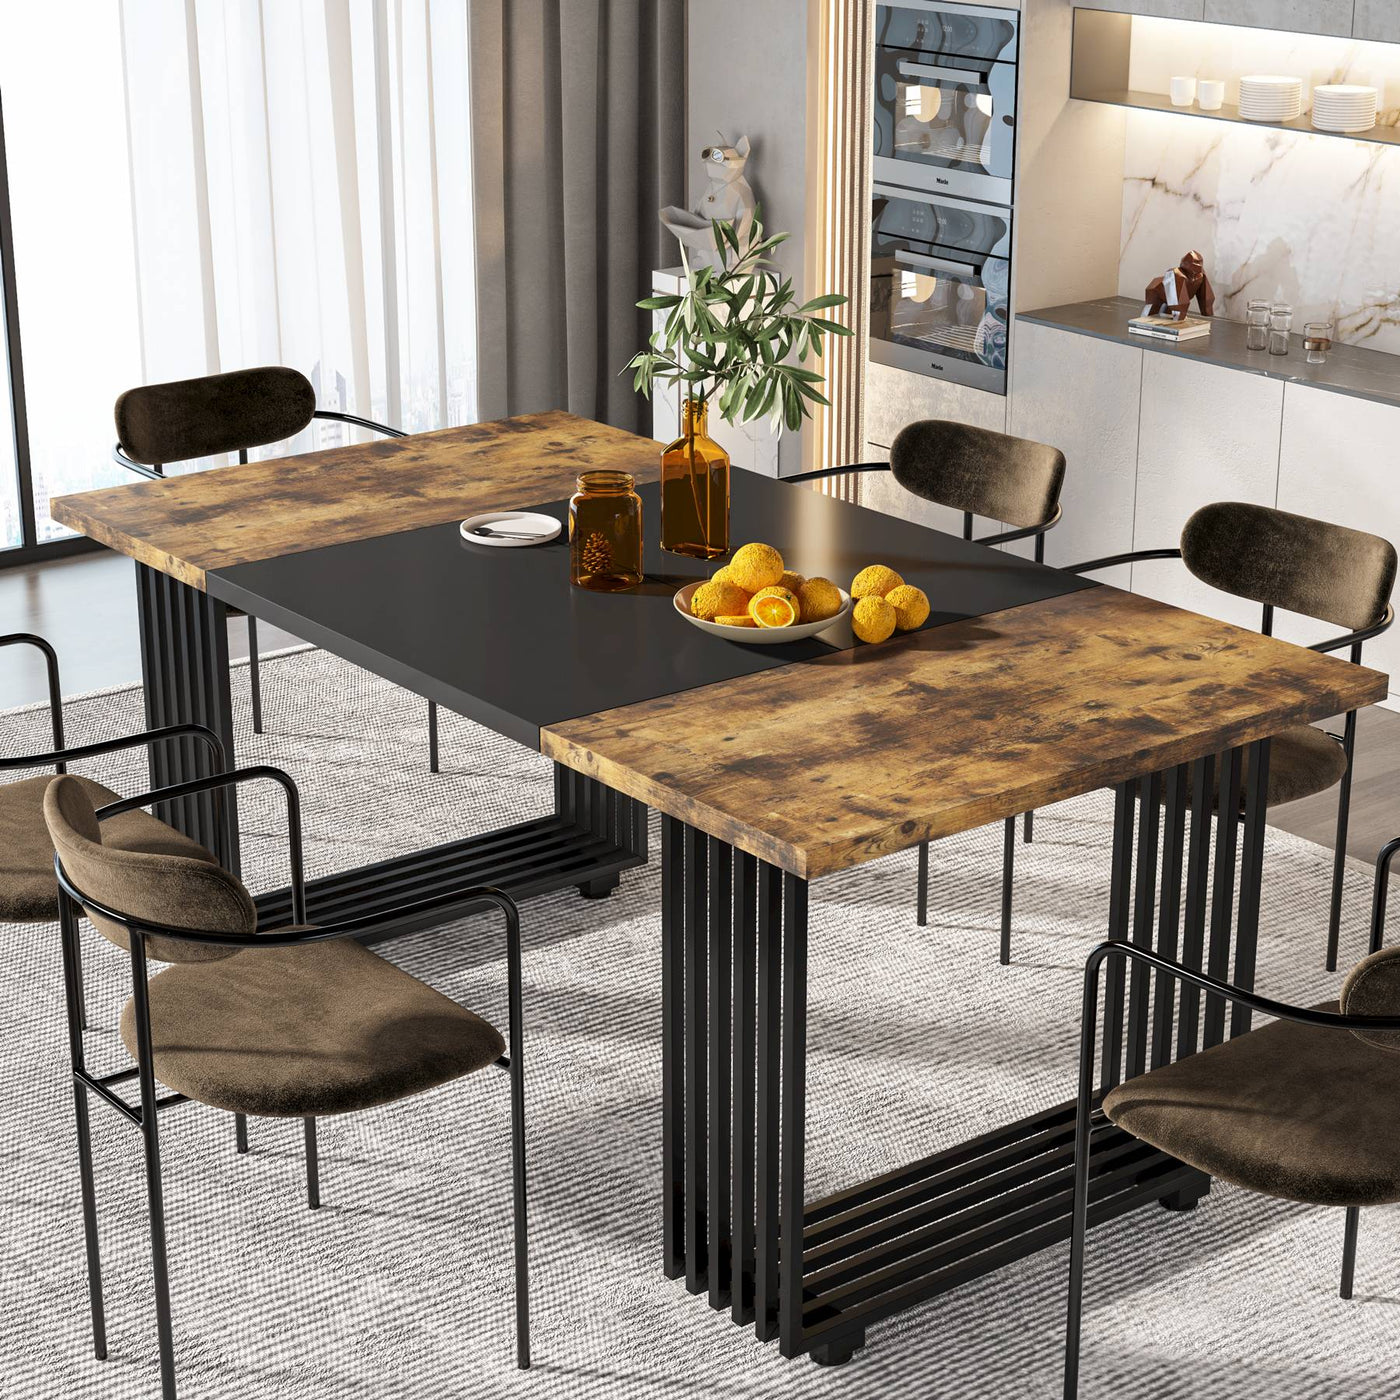 Natal Modern Dining Table | 70.8 Inches Rectangular Marble Faux Wooden Bron Kitchen Table for 6-8 People